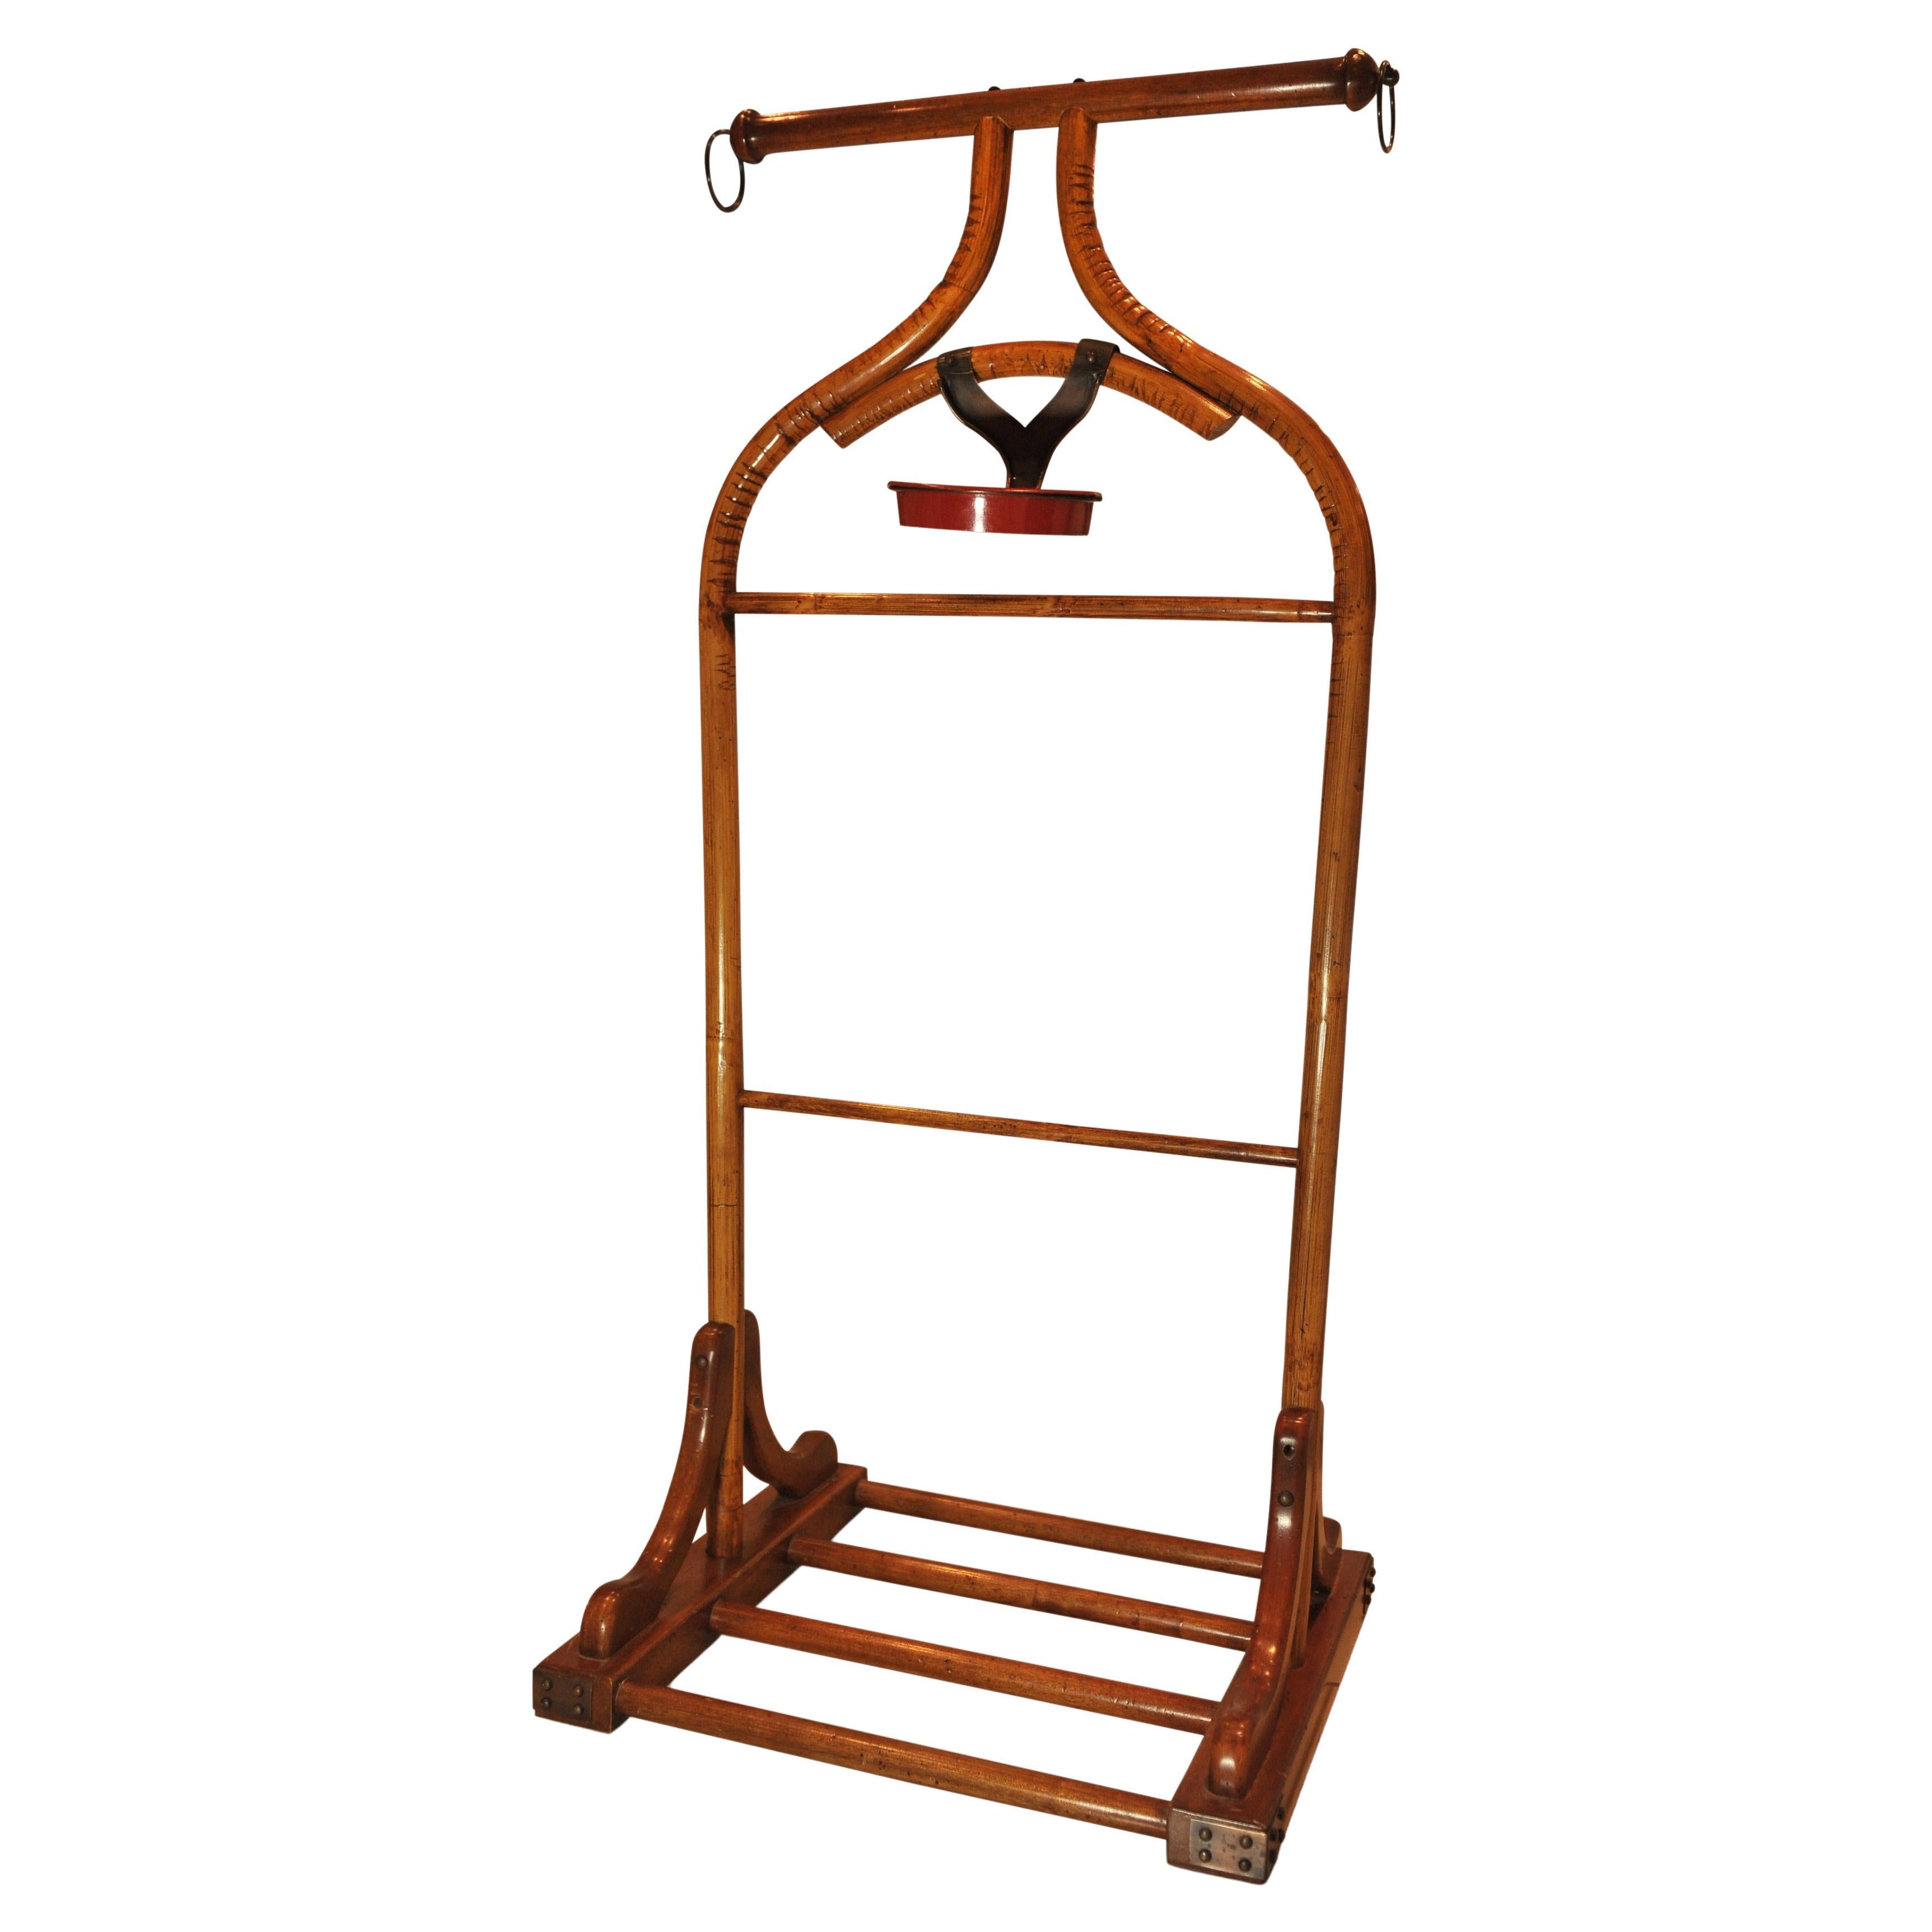 1920's Rare Art Deco Grand Ritz Hotel Simulated Bamboo & Wood Valet Stand For Sale